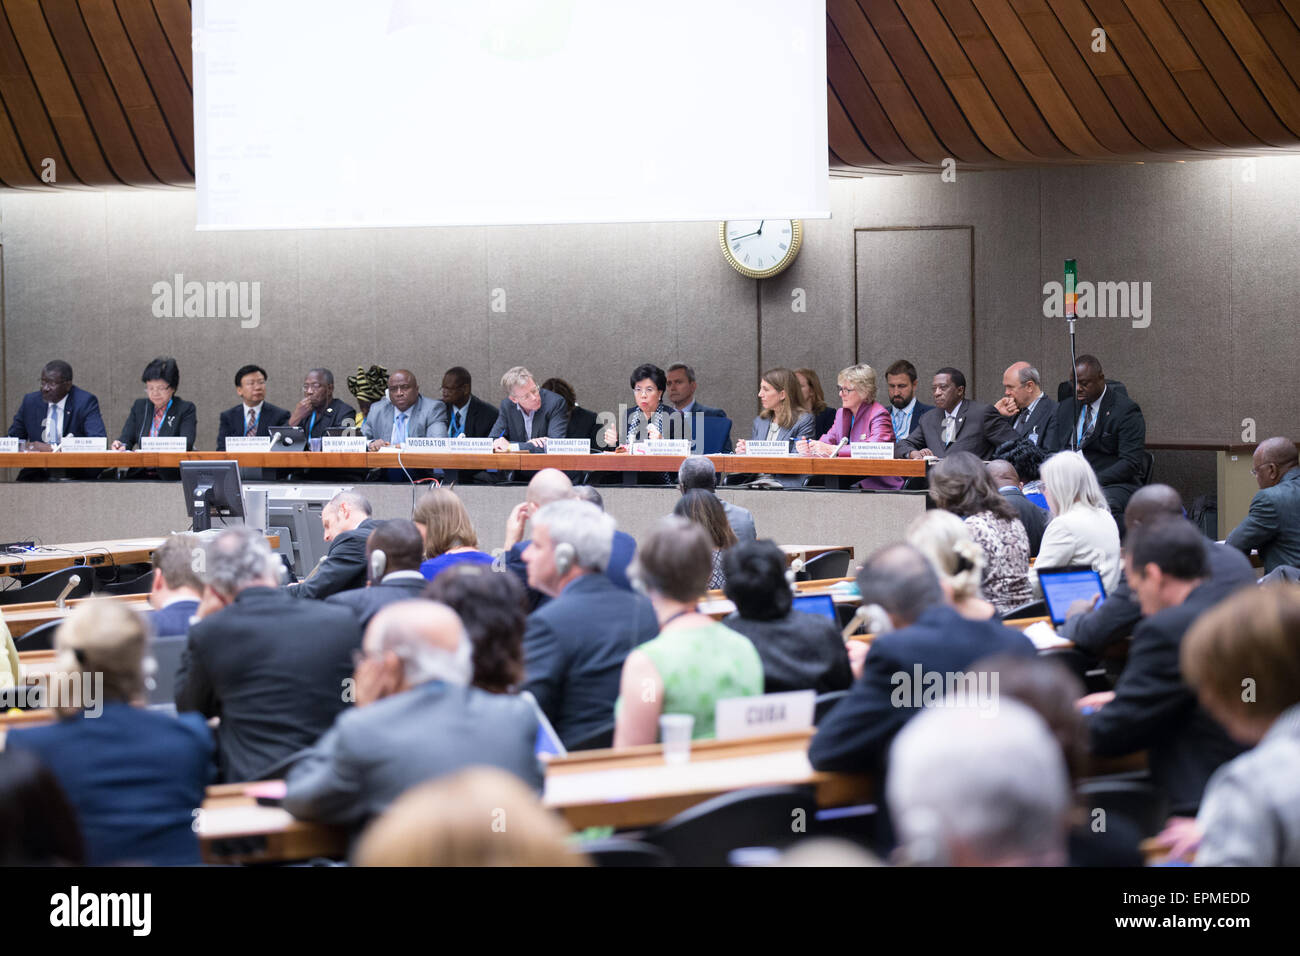 Geneva, Switzerland. 19th May, 2015. Delegates attend World Health Organisation (WHO) Ebola technical briefing in Geneva, Switzerland, on May 19, 2015. The 68th session of the World Health Assembly entered the second day in Geneva. Over 3,000 delegates from 194 member states would focus on the discussion of Ebola outbreaks and the post-2015 health agenda. © Xu Jinquan/Xinhua/Alamy Live News Stock Photo